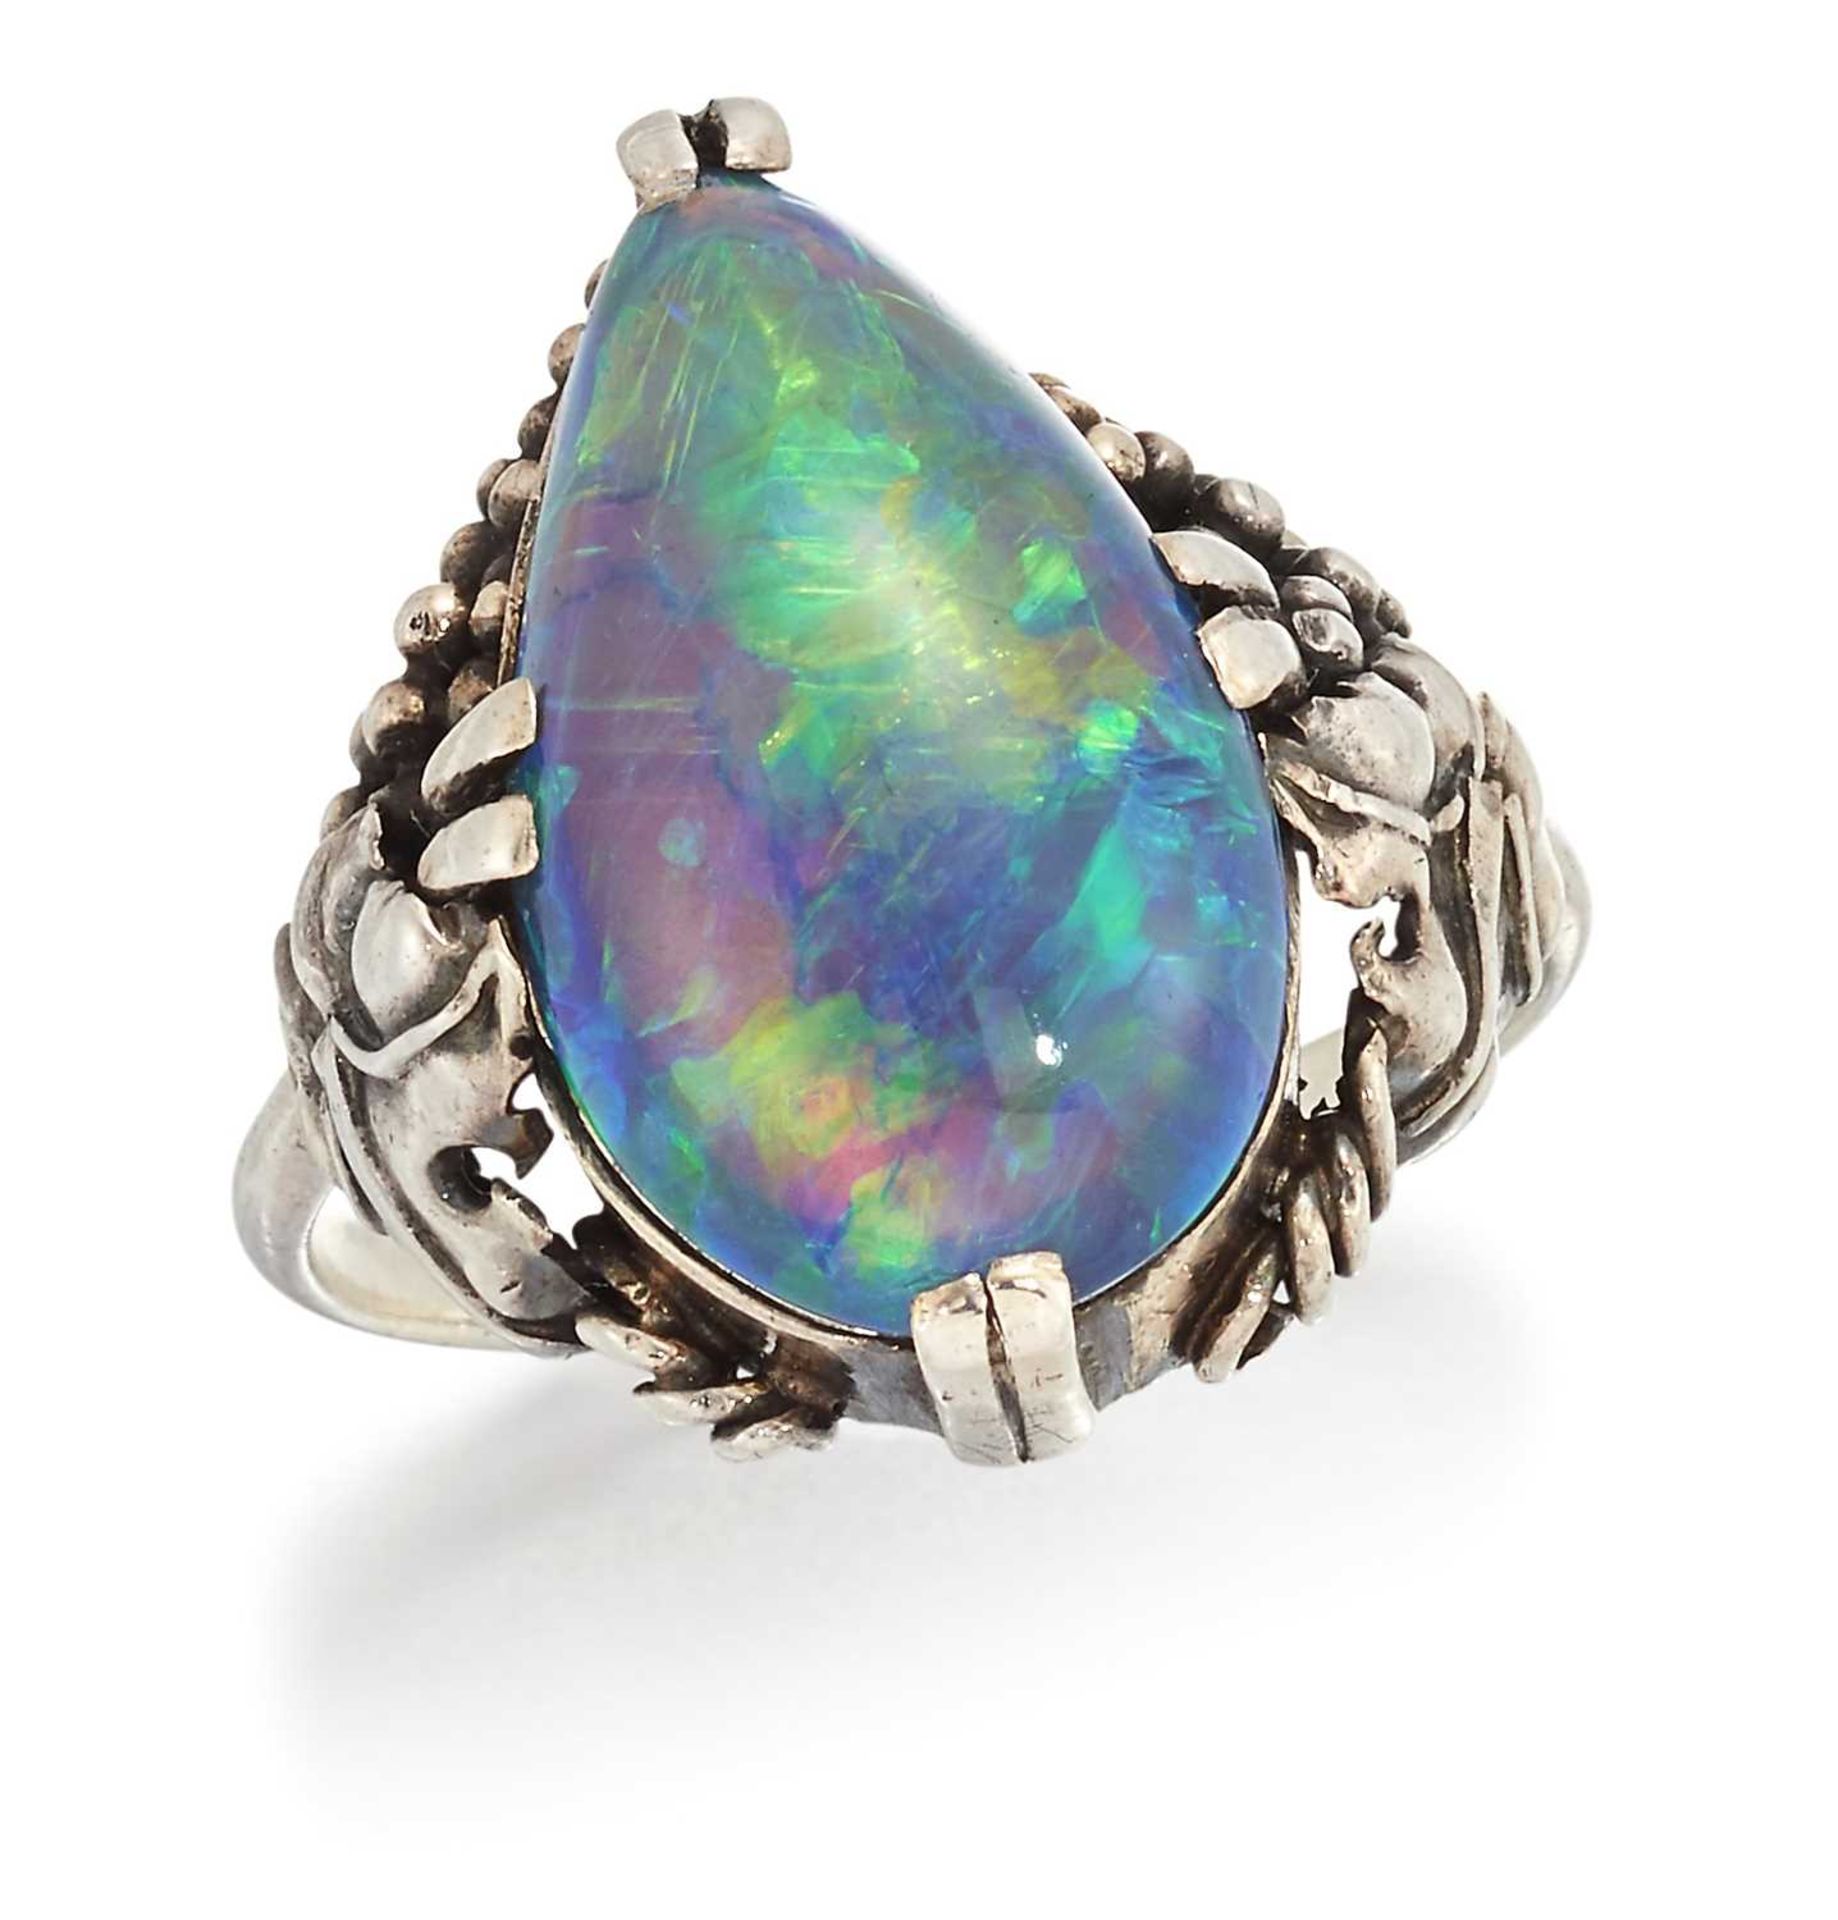 AN ARTS AND CRAFTS BLACK OPAL RING